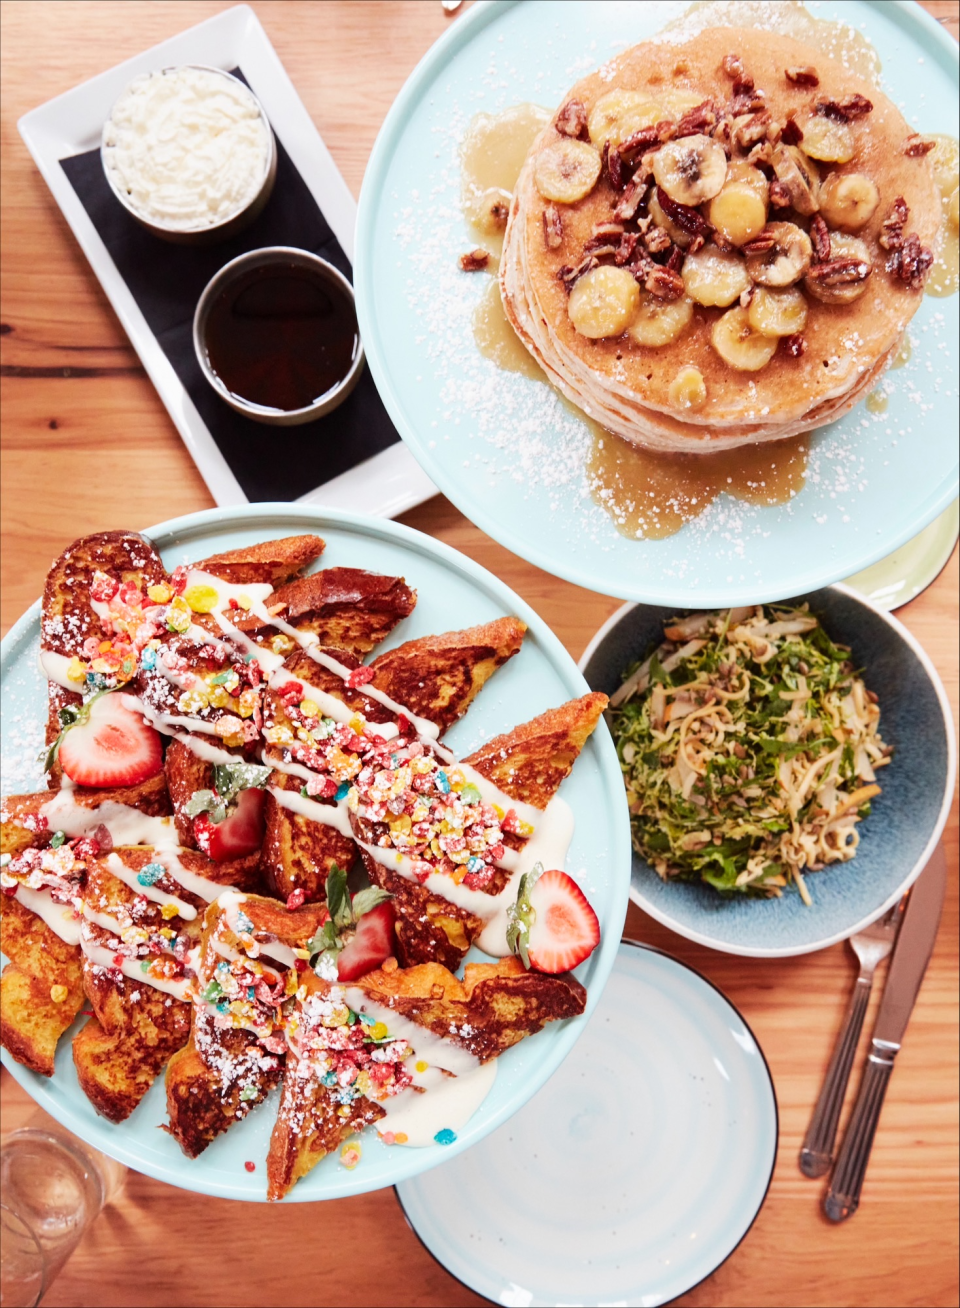 Fruity Pebbles French toast and banana foster pancakes are offered at 220 Merrill for Mother's Day.